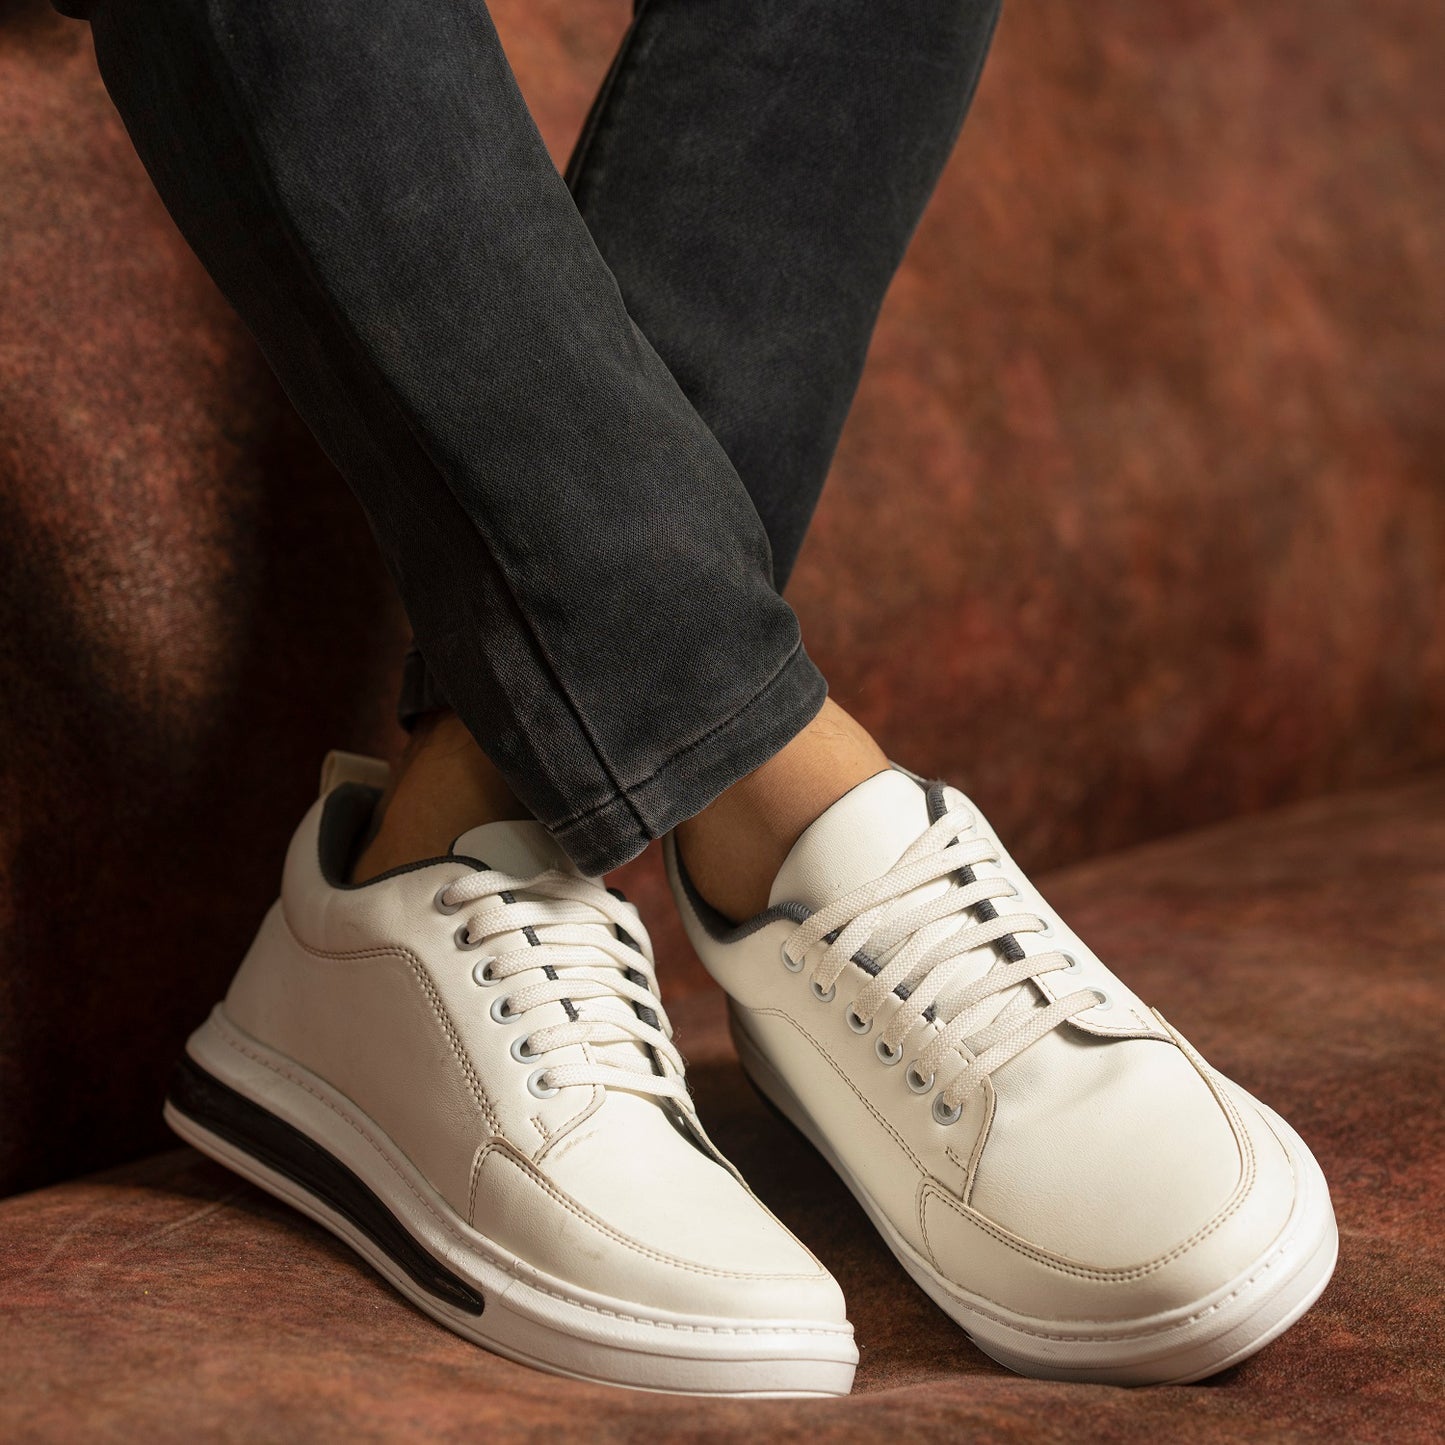 The Aurous Serenity Laceup Sneakers